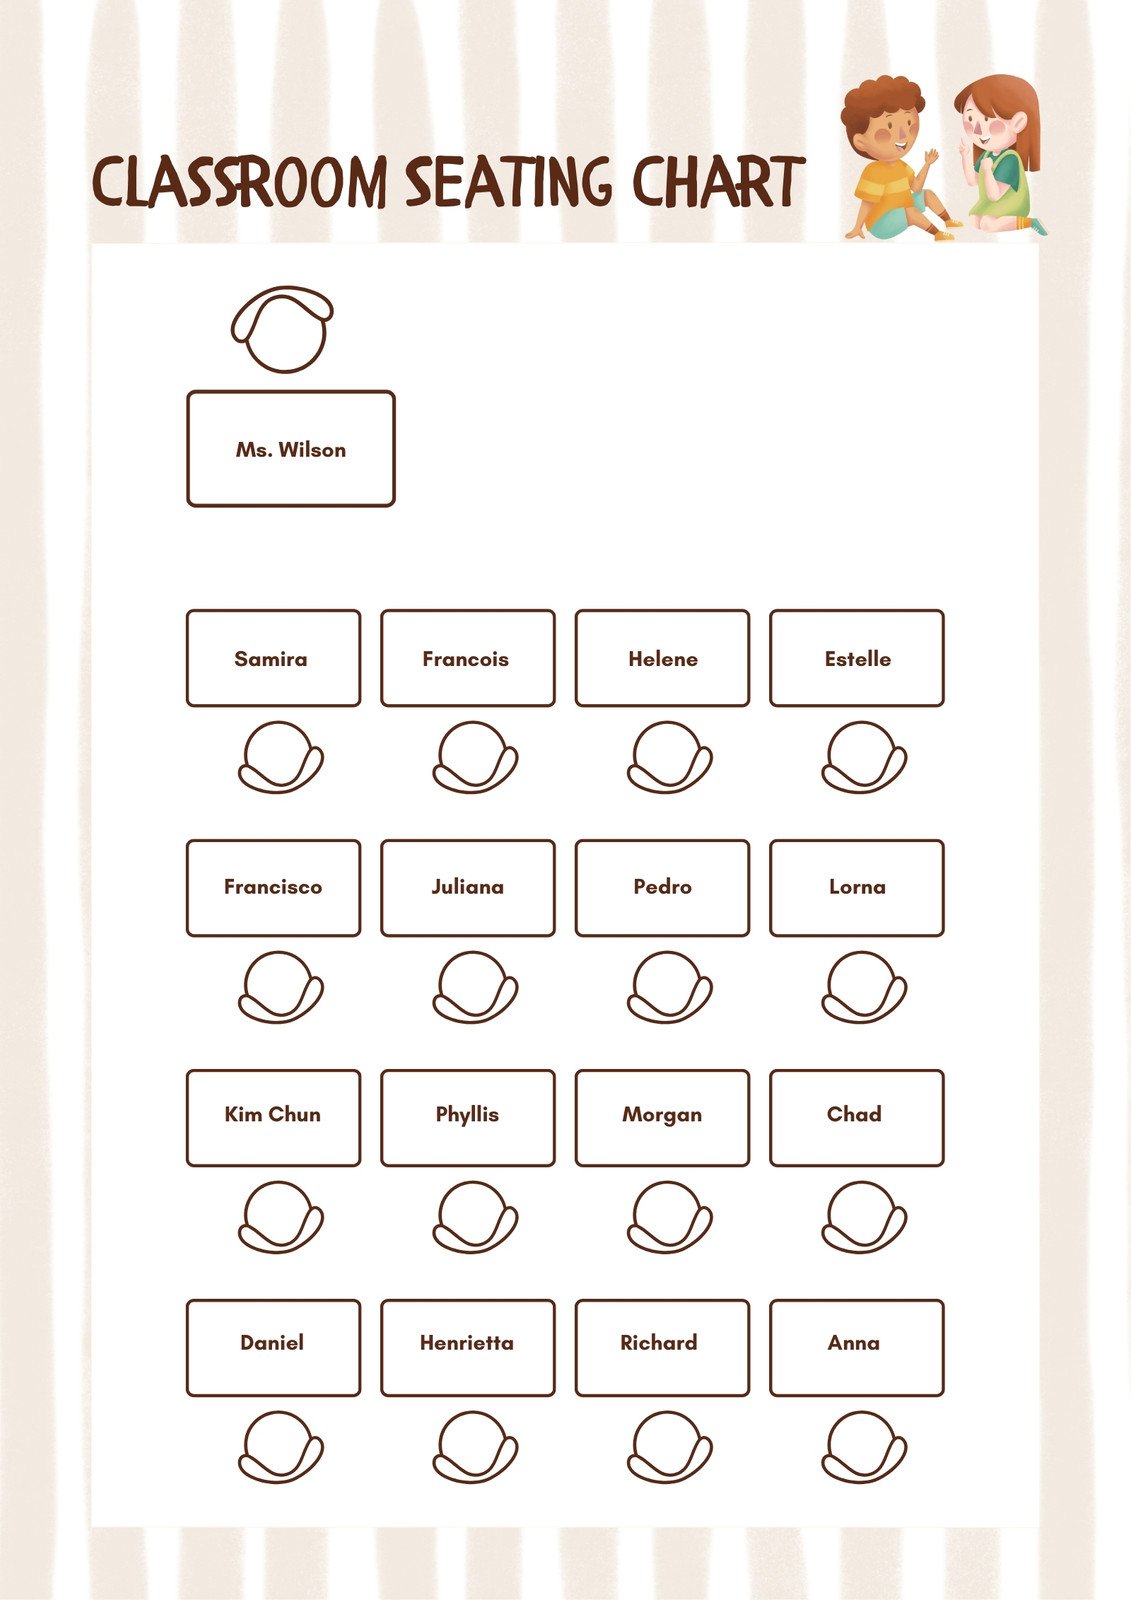 Classroom Seating Chart in White and Cream Hand Drawn Style